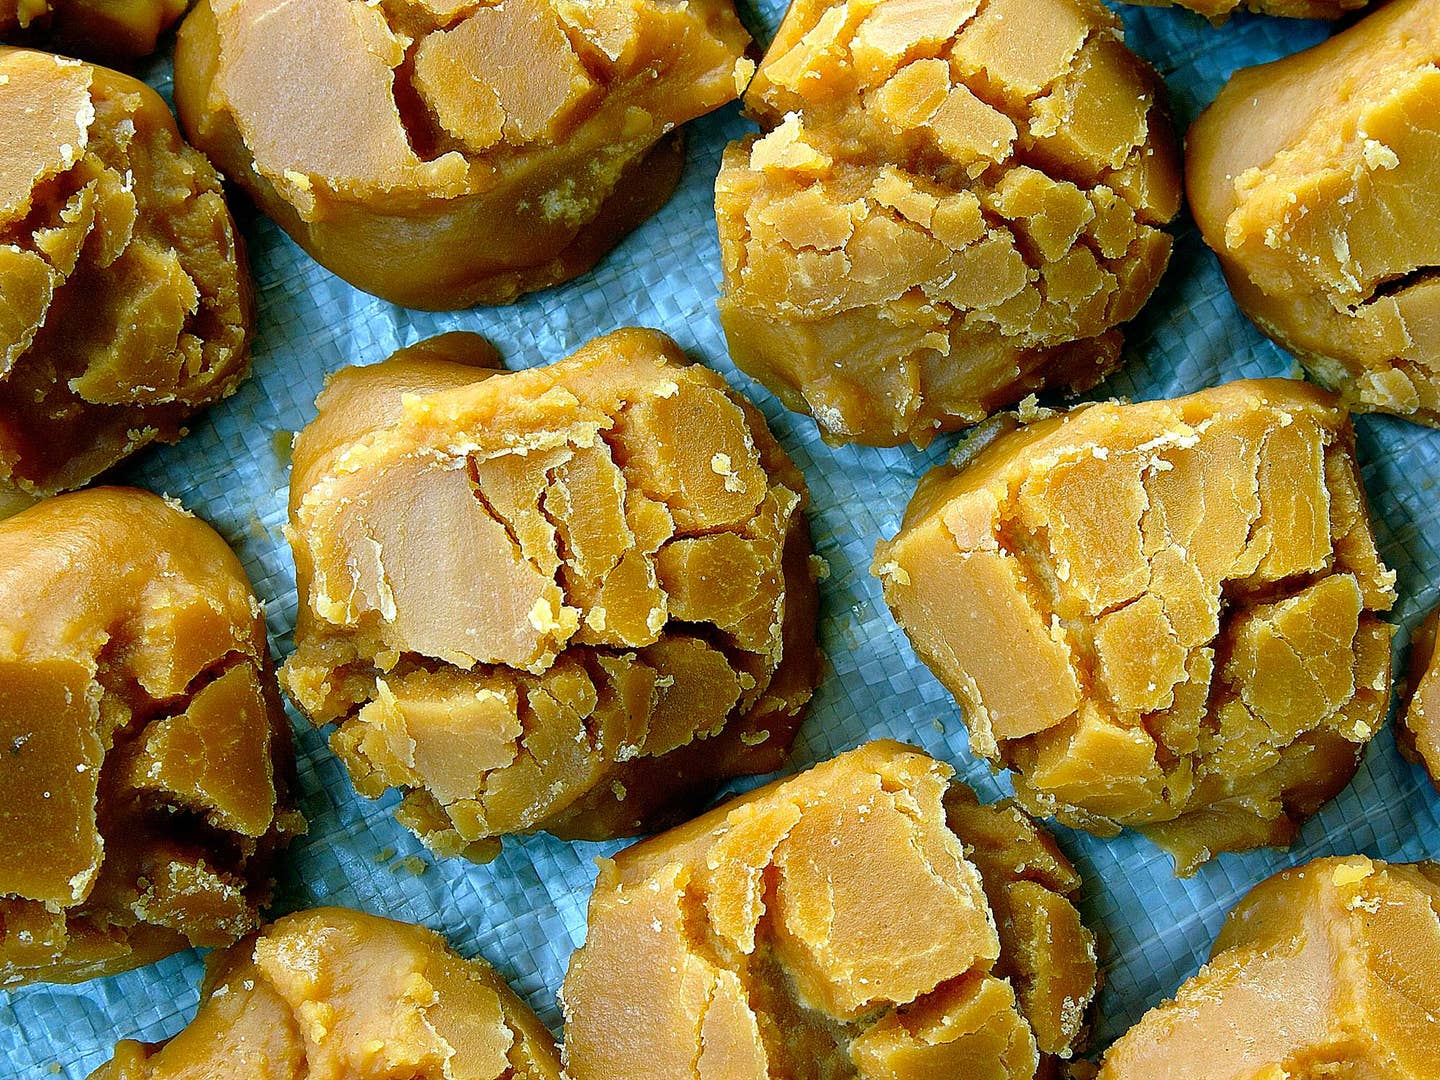 Go Cook With Jaggery, the Essential Sweetener of India